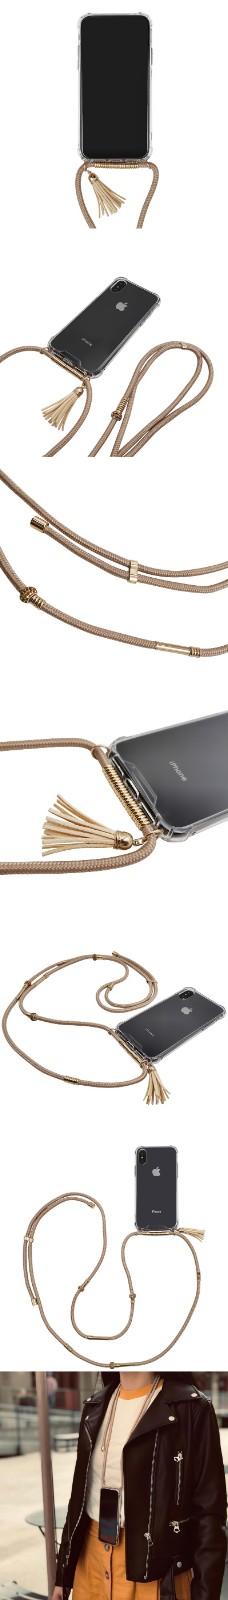 Tassel necklace protective mobile phone case for iPhone-1